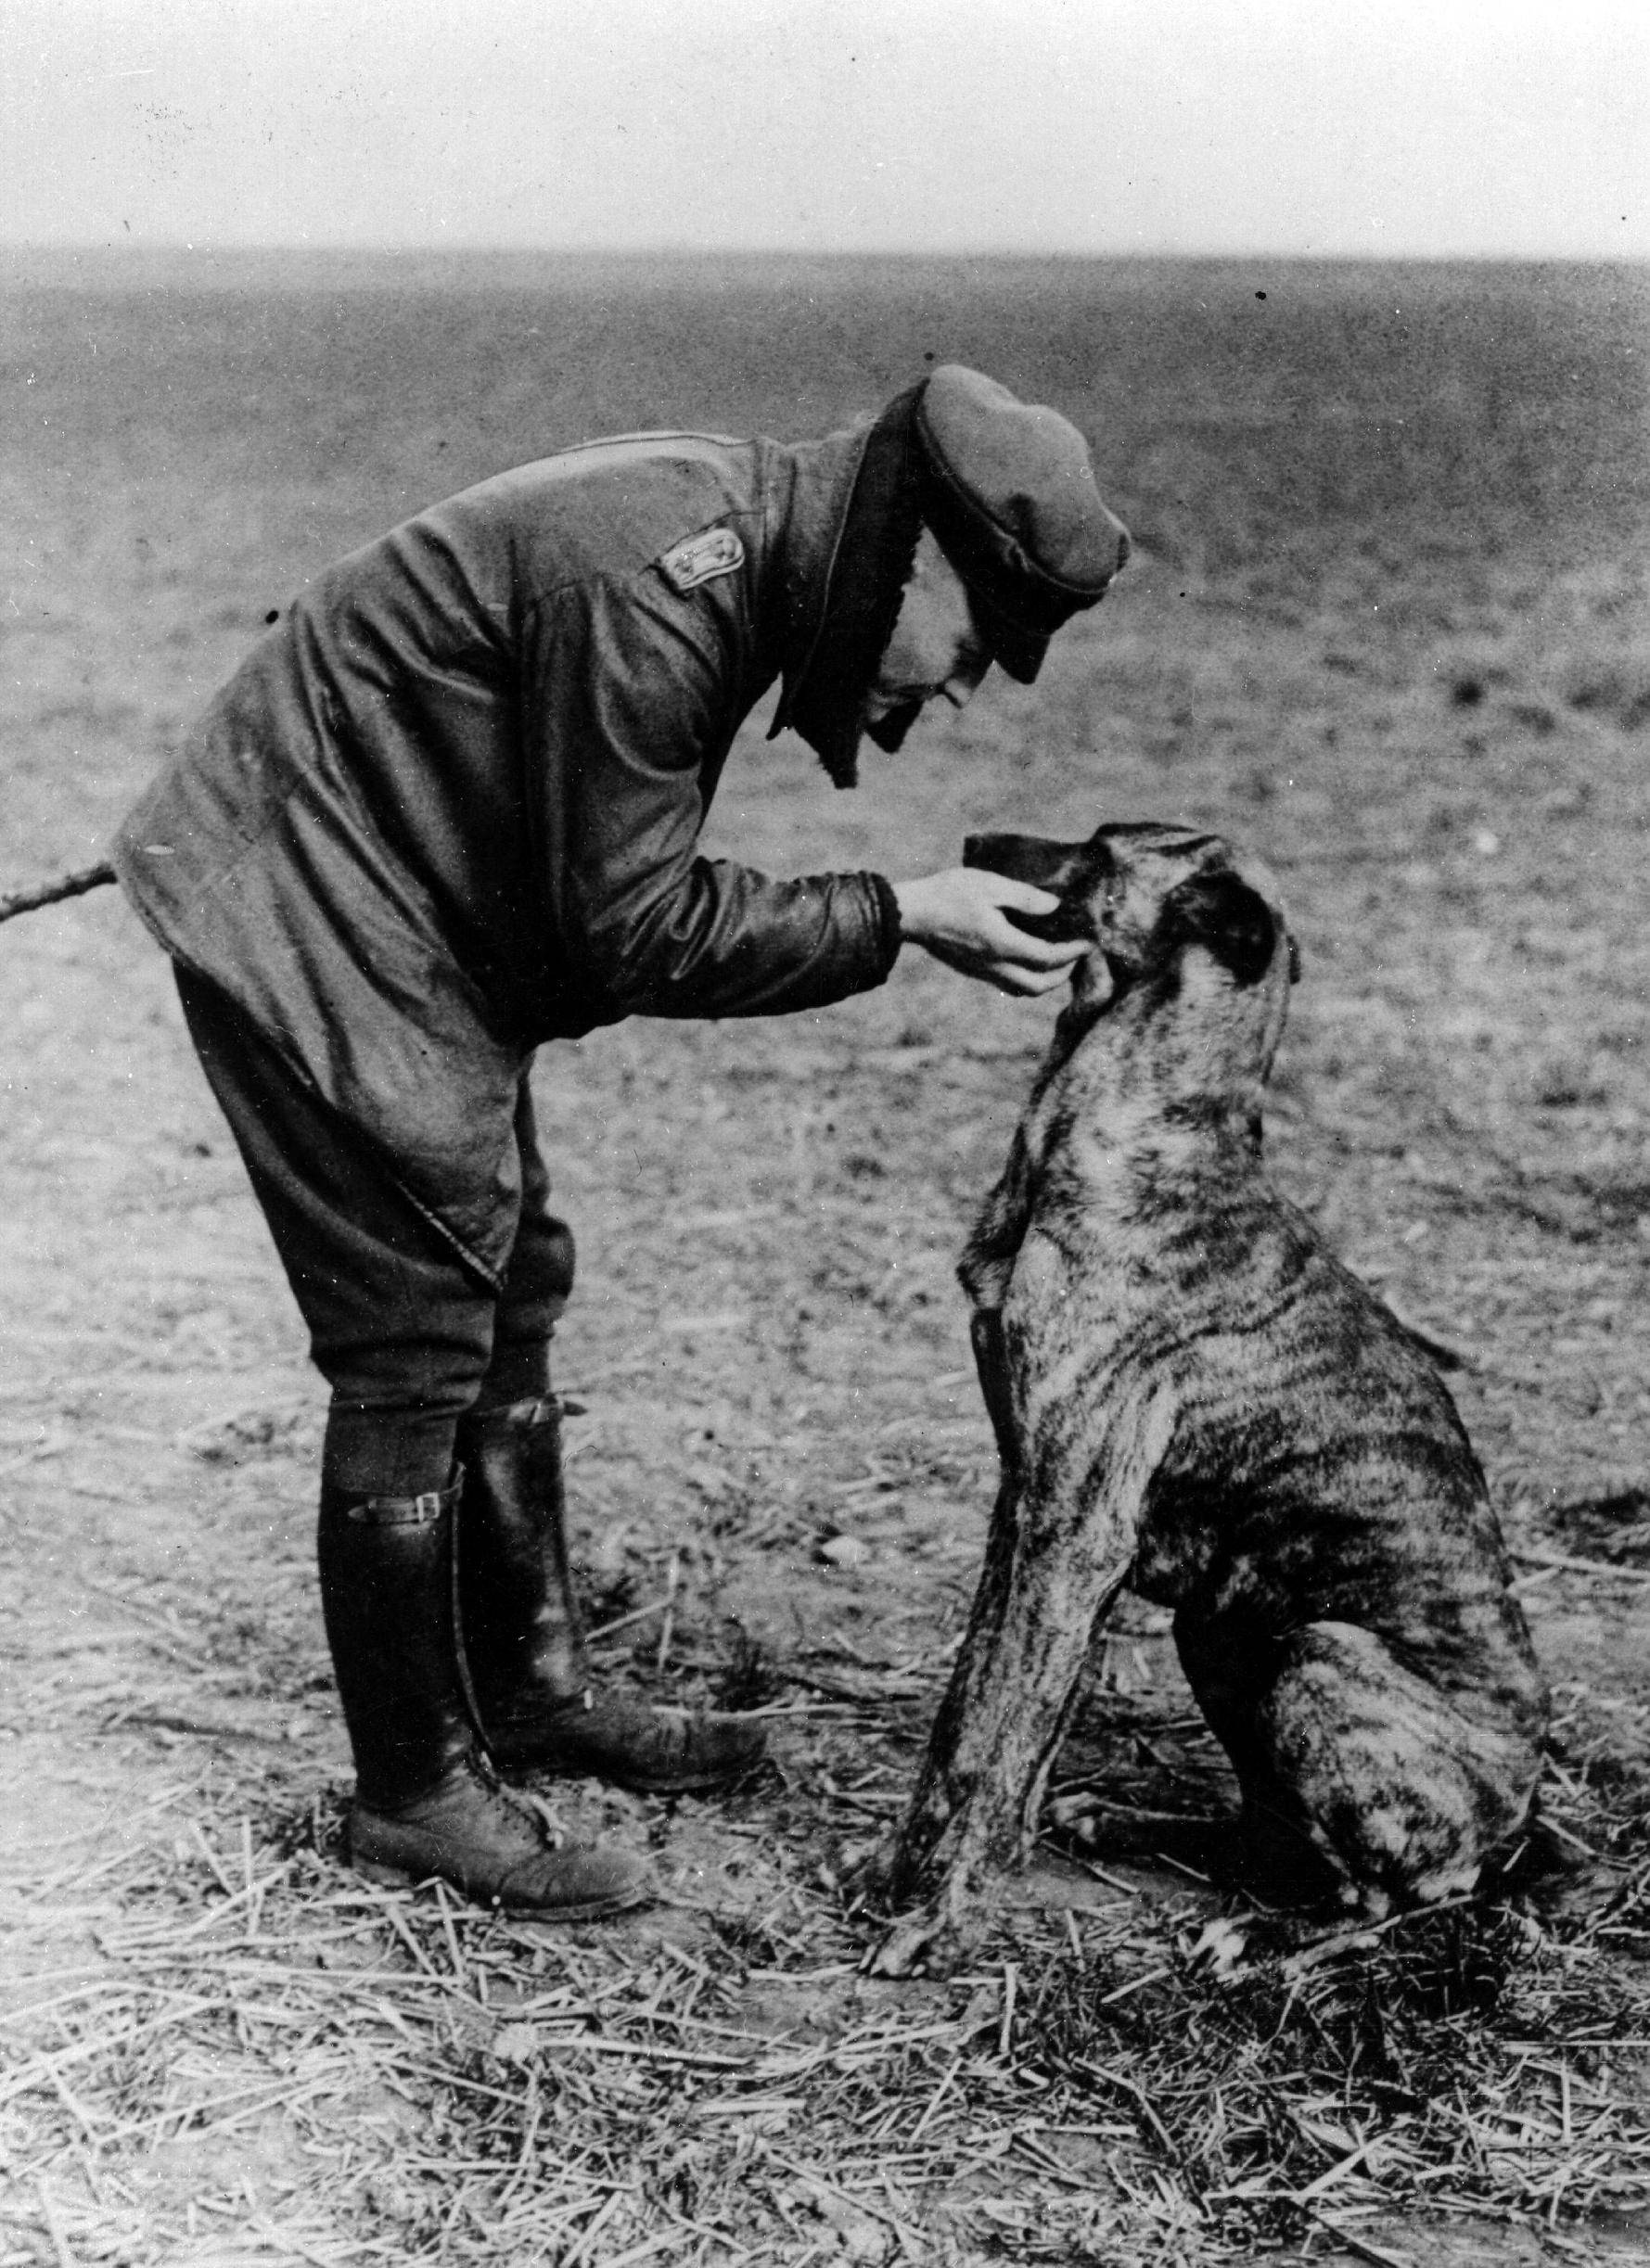 The famous Red Baron, who was a feared fighter pilot in WWI is seen here with his dog in 1916.